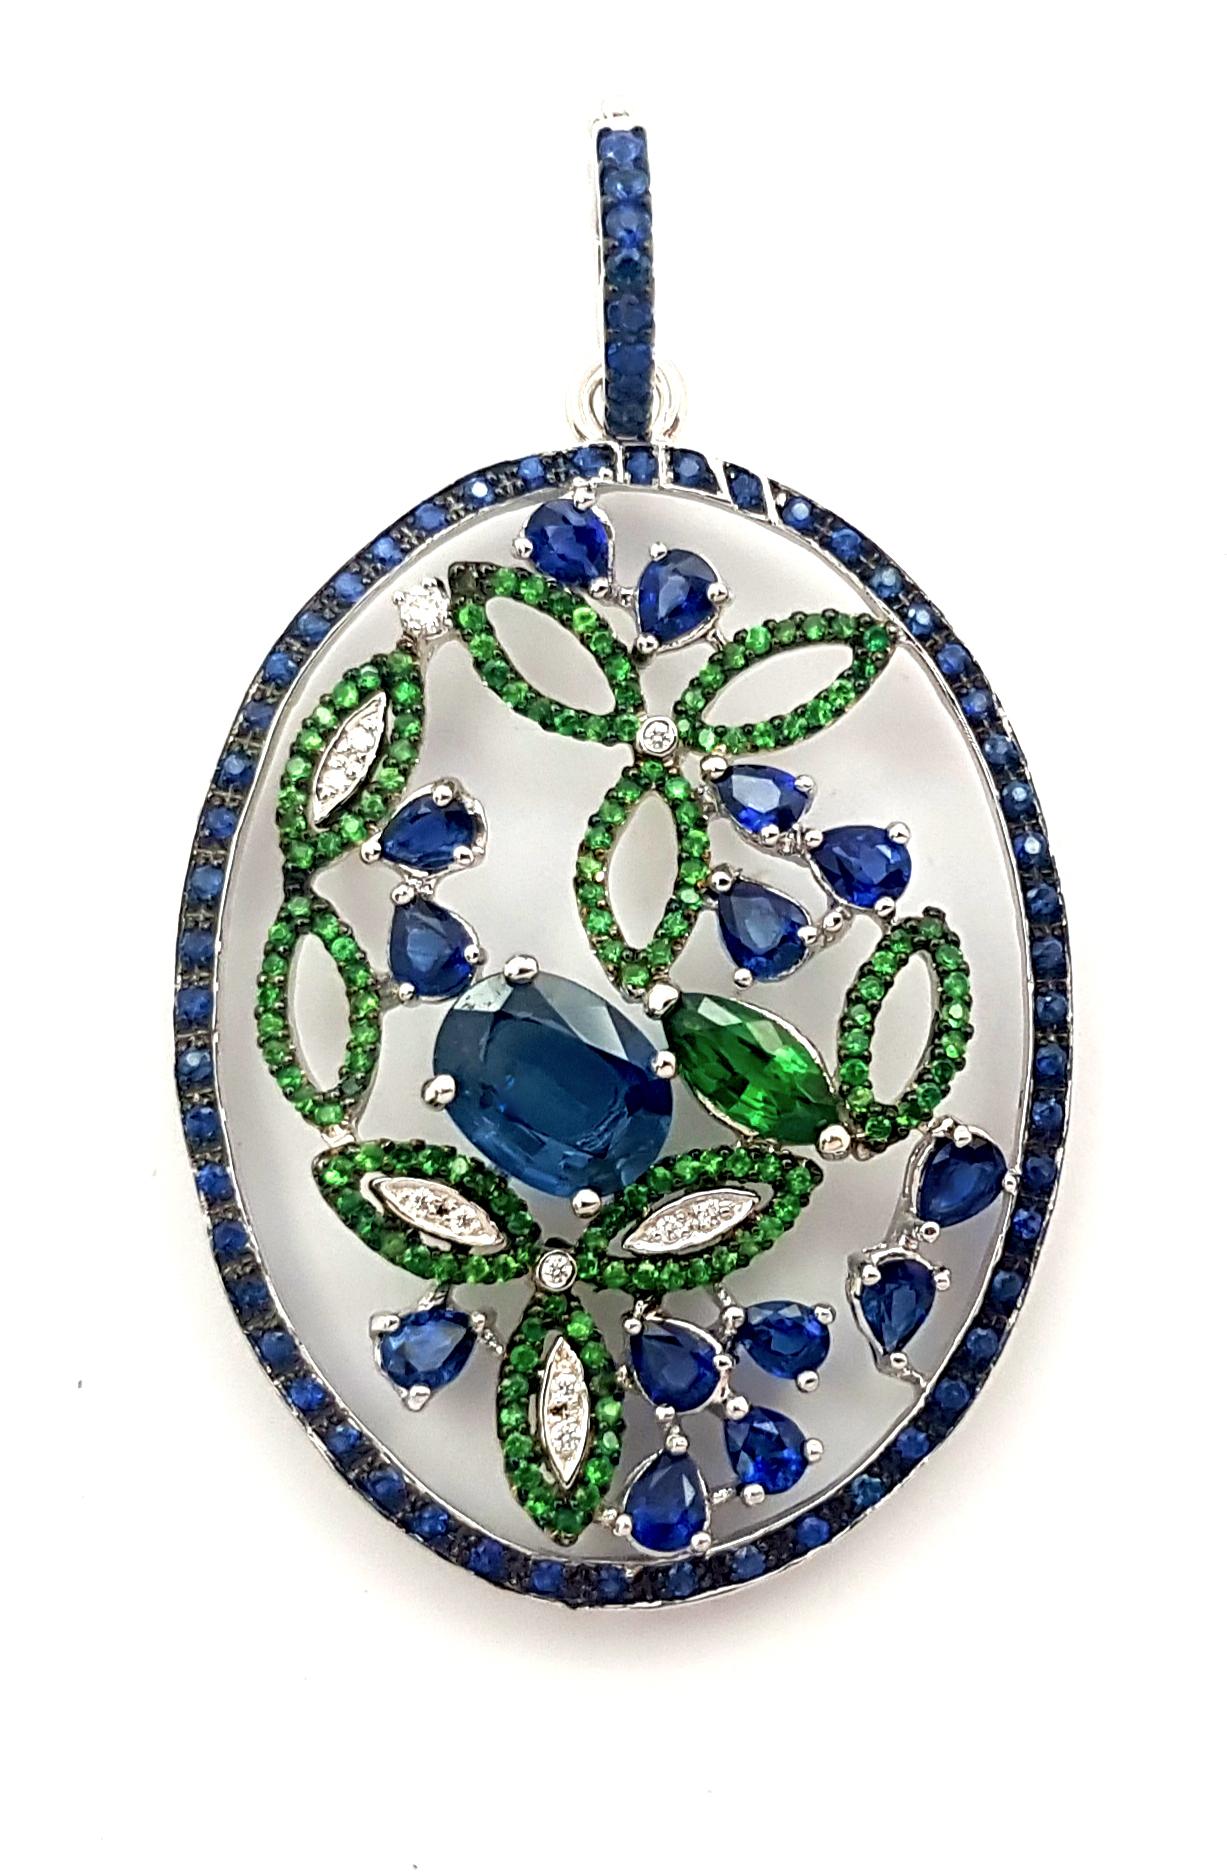 Blue Sapphire 6.07 carats, Tsavorite 1.63 carats and Diamond 0.08 carat Pendant set in 18K White Gold Settings
(chain not included)

Width: 3.5 cm 
Length: 5.7  cm
Total Weight: 15.26 grams

